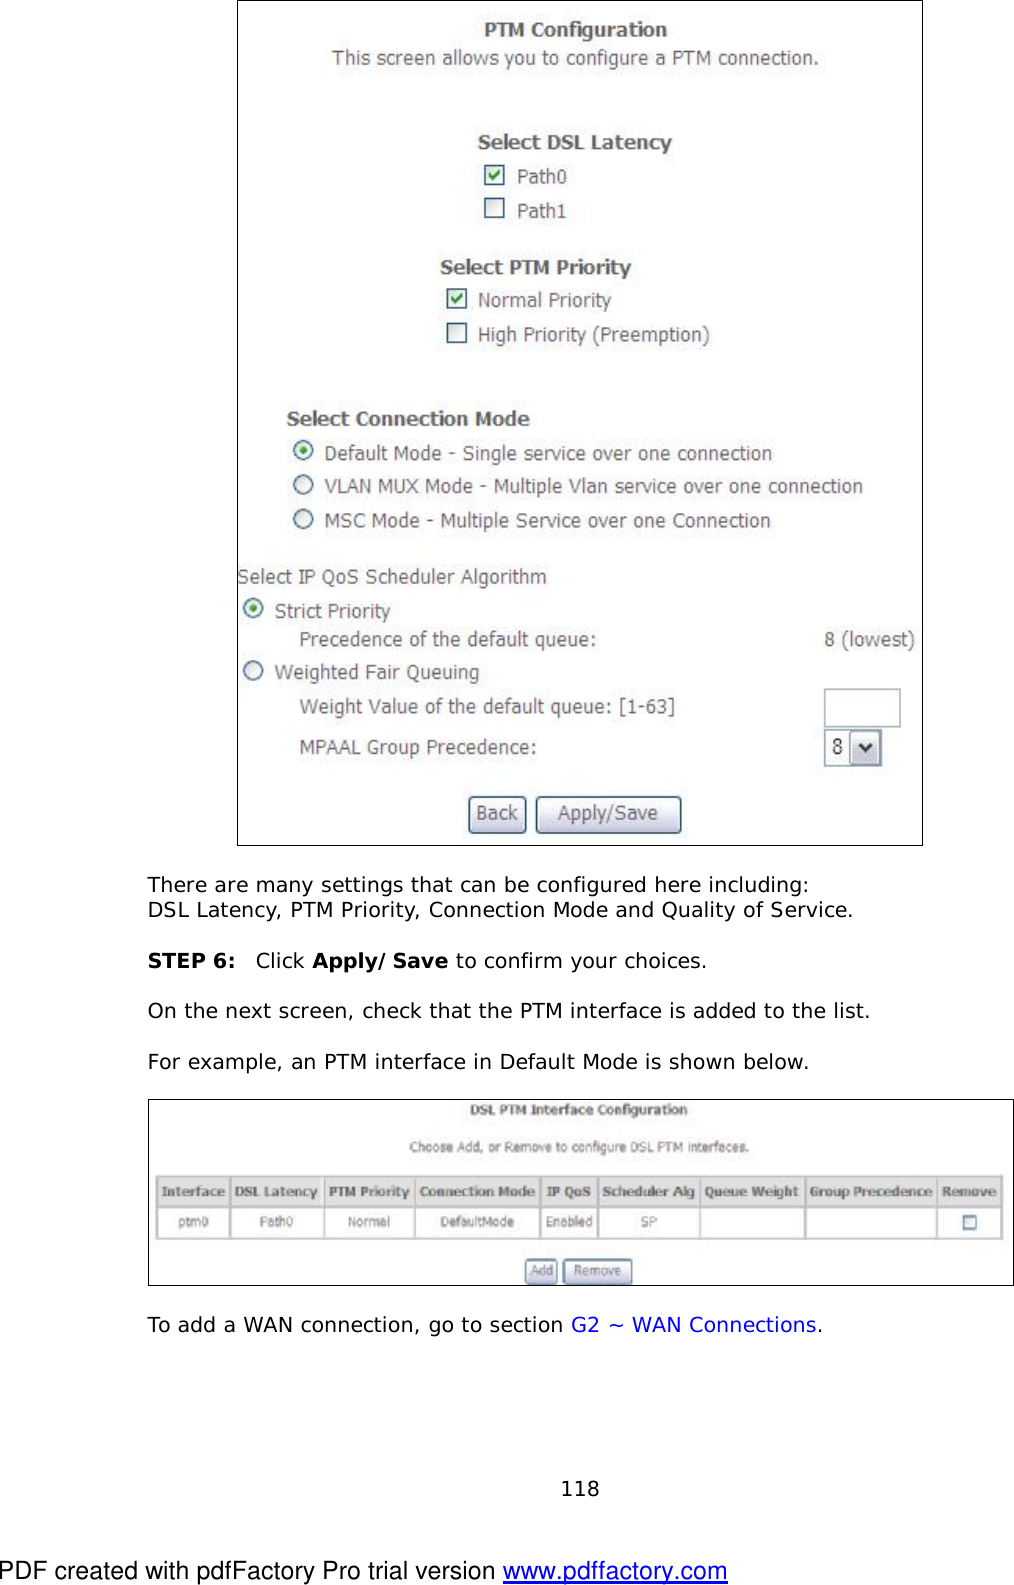  118   There are many settings that can be configured here including:  DSL Latency, PTM Priority, Connection Mode and Quality of Service.  STEP 6:  Click Apply/Save to confirm your choices.   On the next screen, check that the PTM interface is added to the list.   For example, an PTM interface in Default Mode is shown below.     To add a WAN connection, go to section G2 ~ WAN Connections.  PDF created with pdfFactory Pro trial version www.pdffactory.com